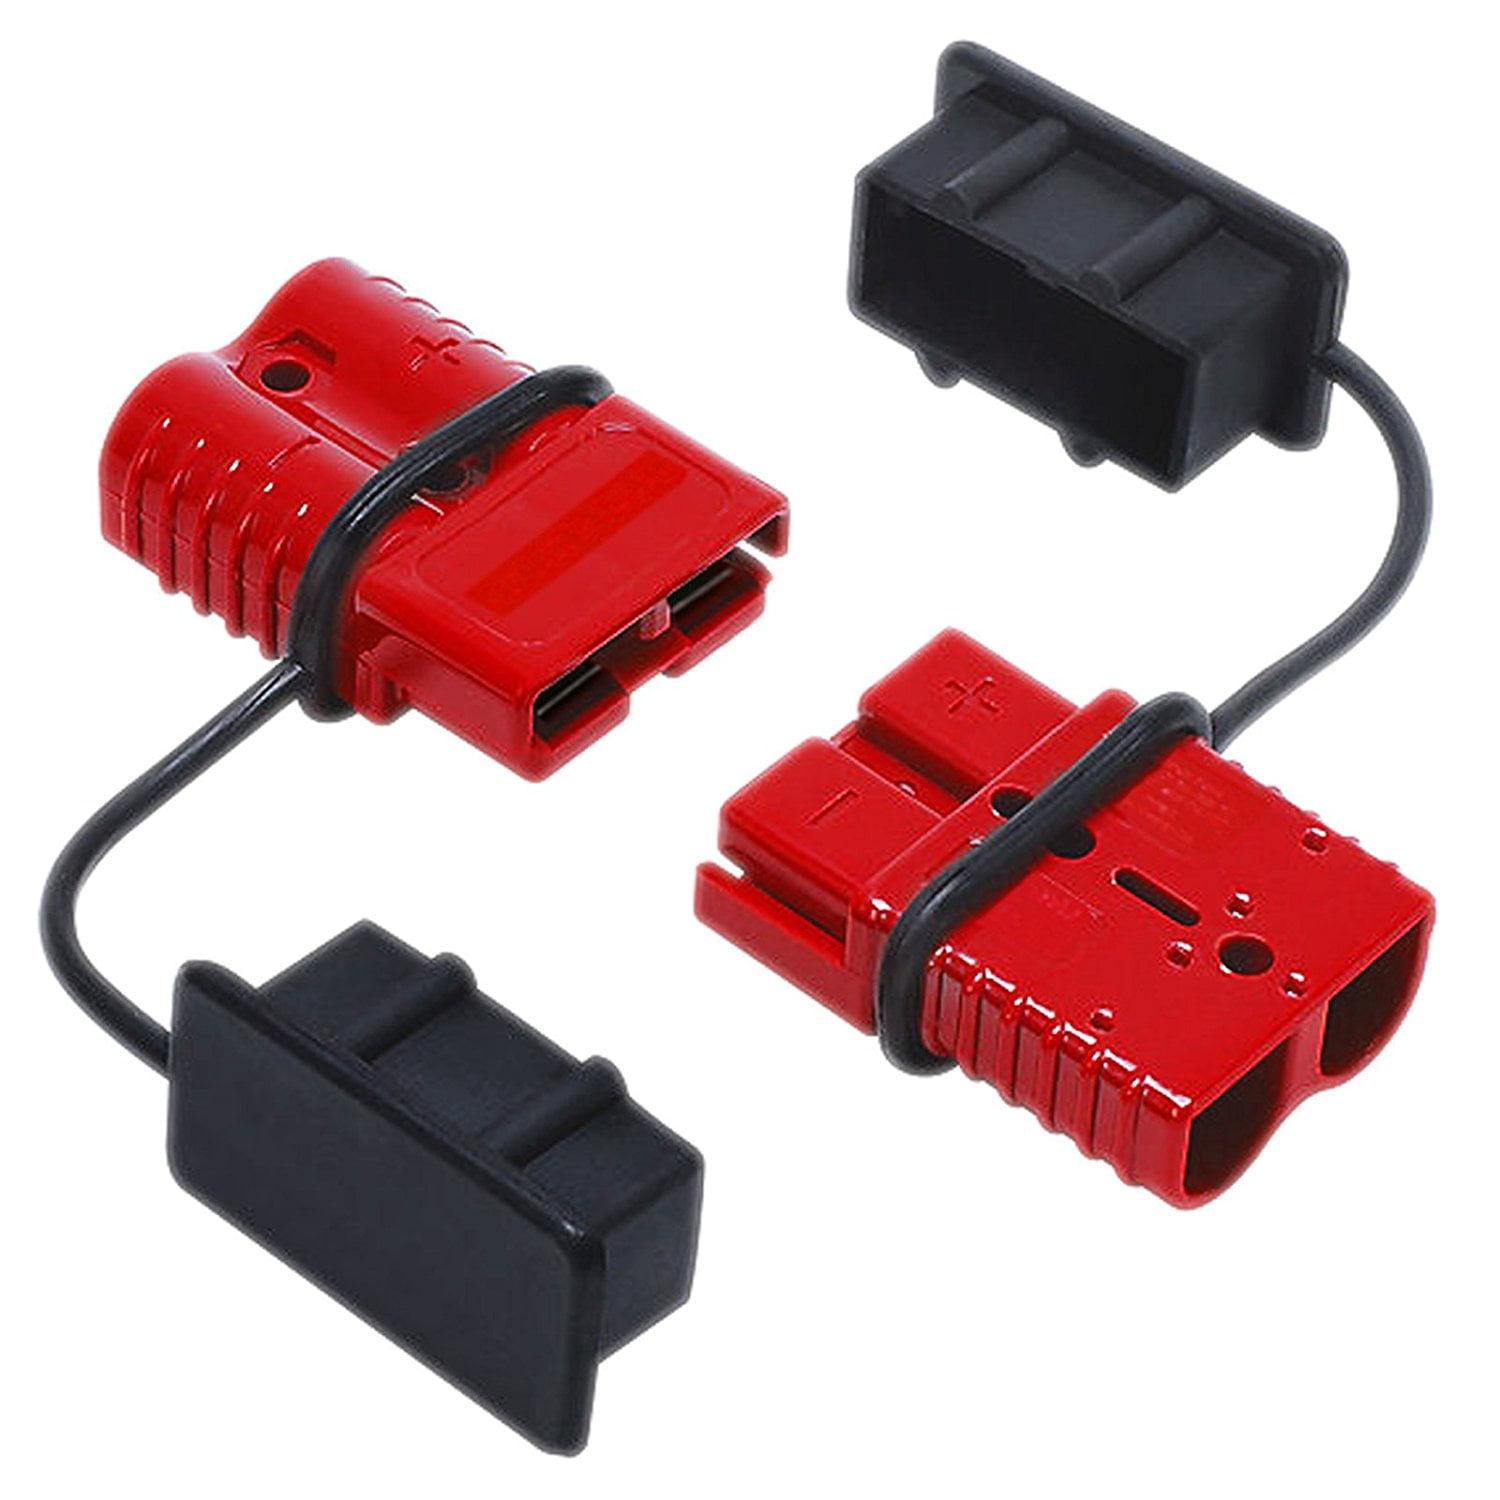 QiXin Universal 2-4 Gauge 175A Battery Cable AWG 1/0 Quick Connect Disconnect Wire Harness Plug Kit Recovery Winch Auto Car Trailer Driver Electrical Devices red 6 Pcs 